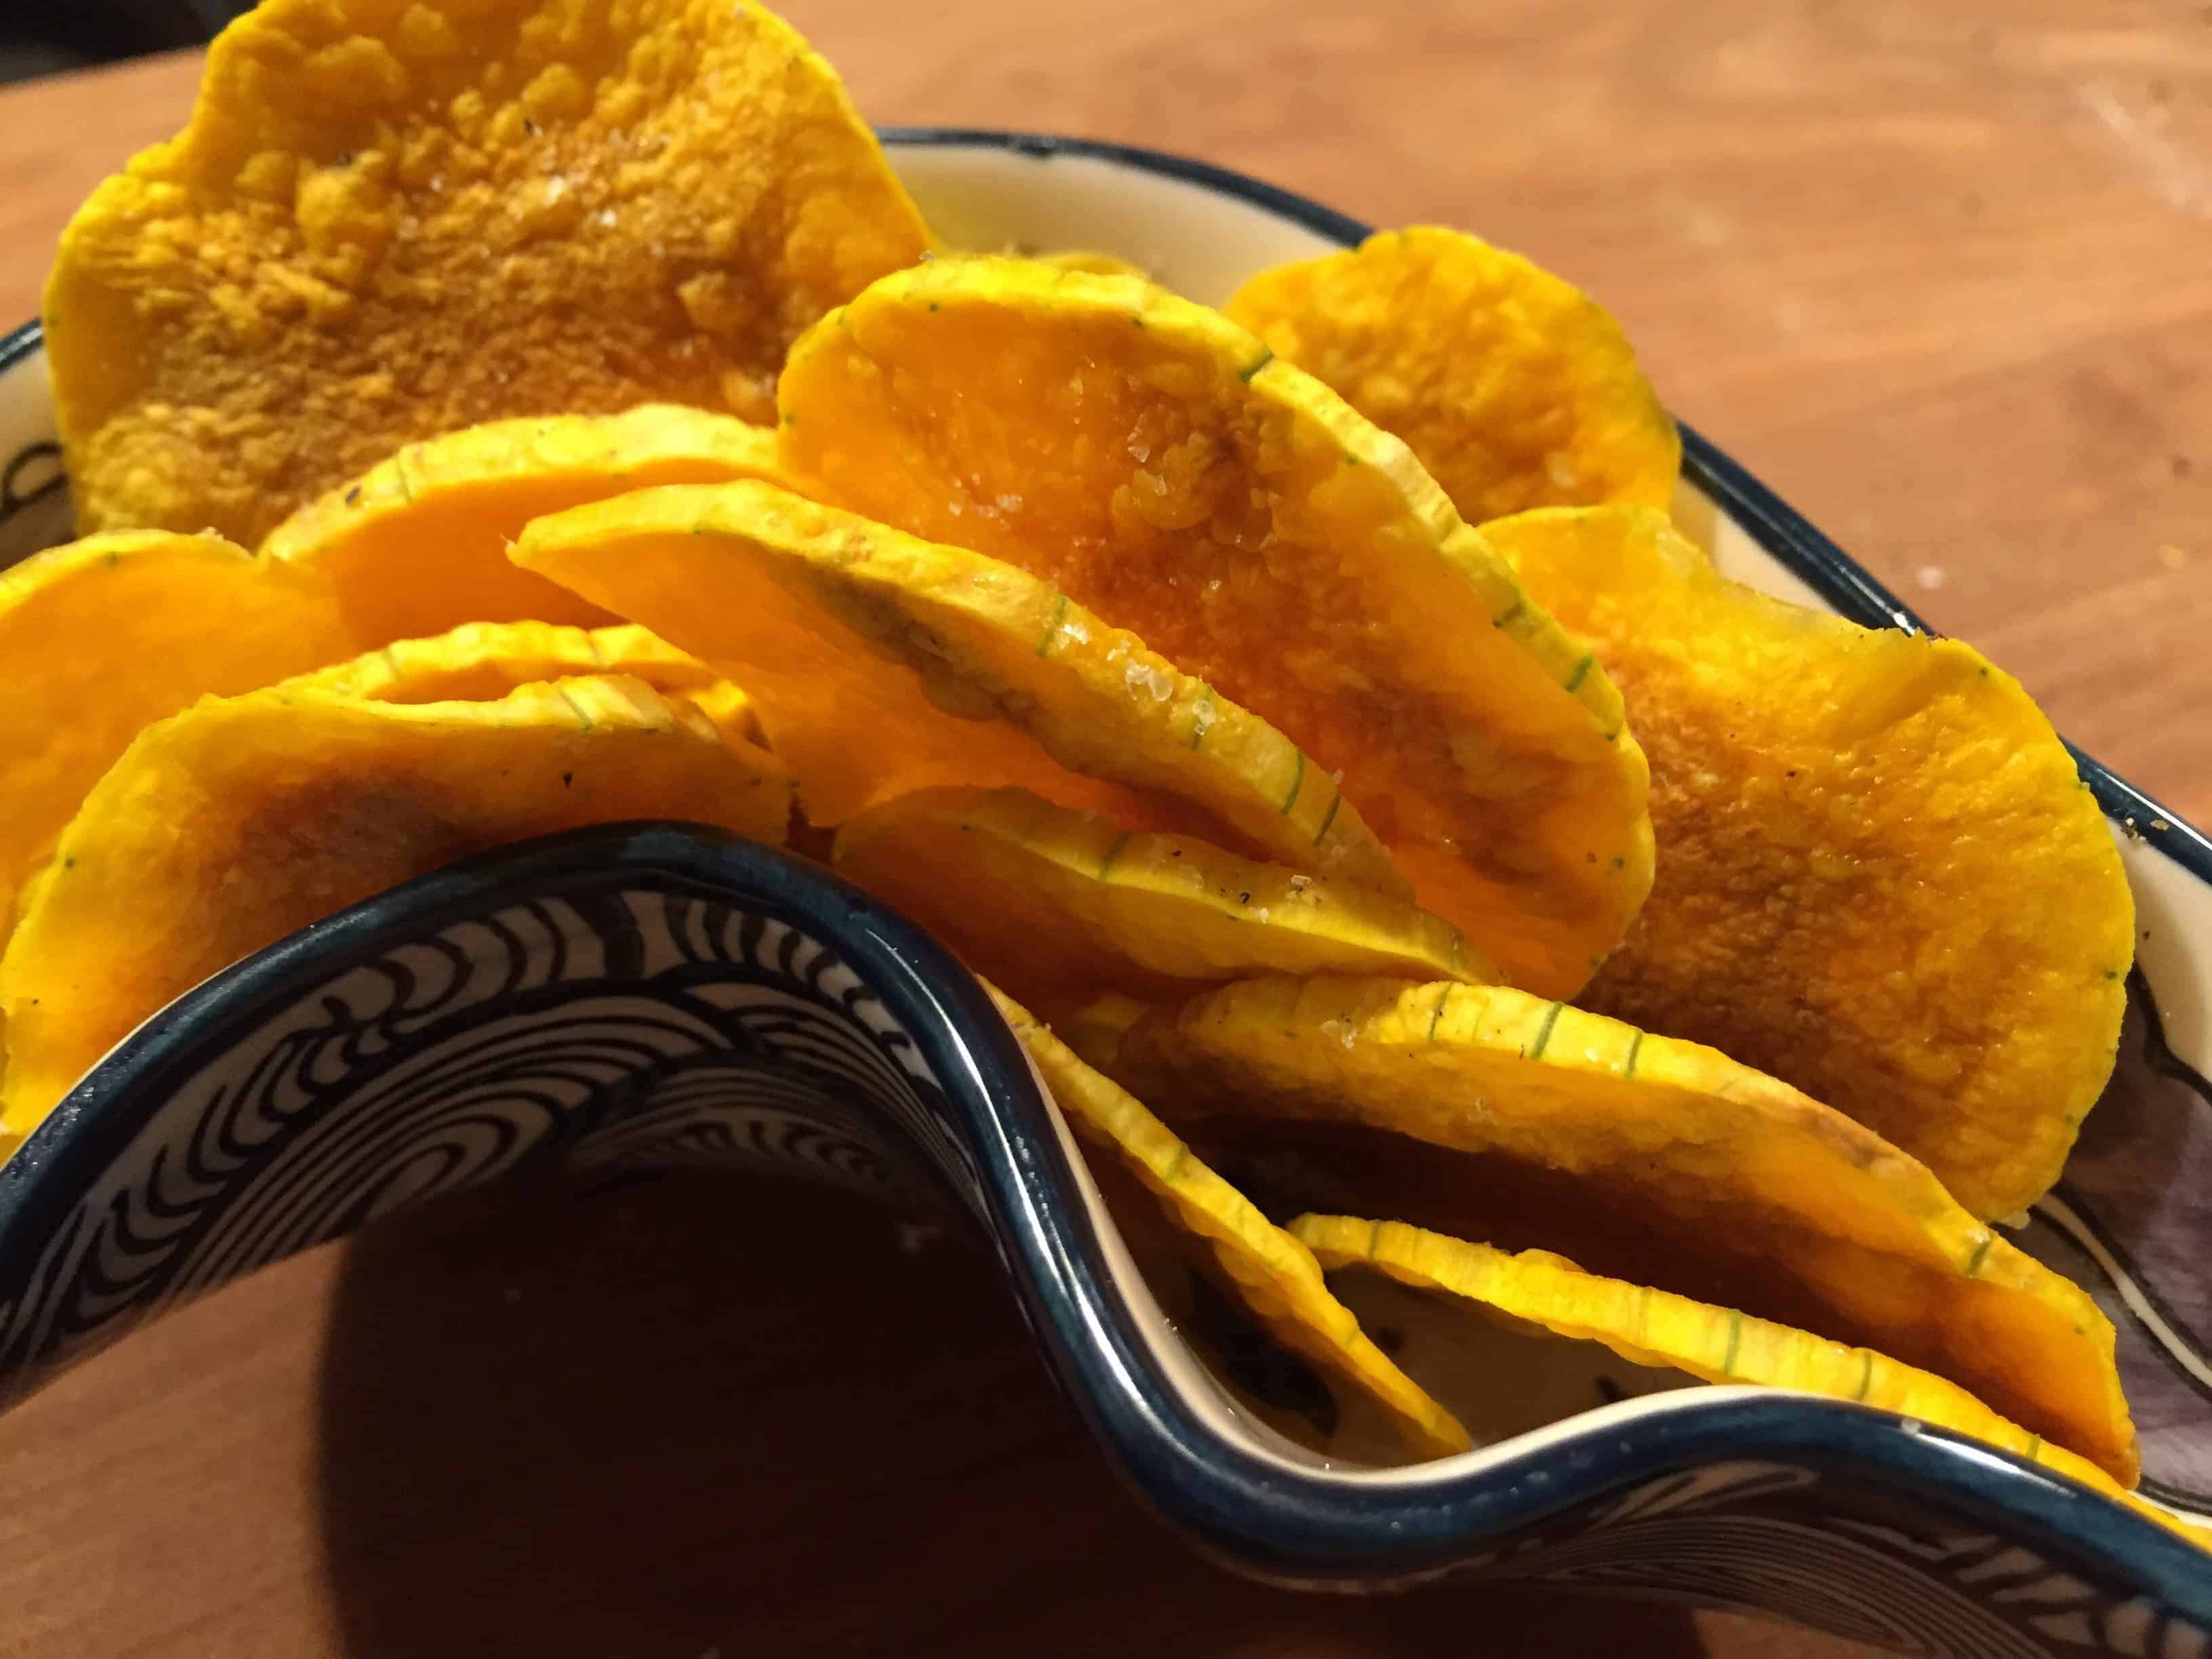 finished_product_crispy_paleo_butternut_squash_chips_good_for_dipping_with_included_panama_hot_sauce_recipe